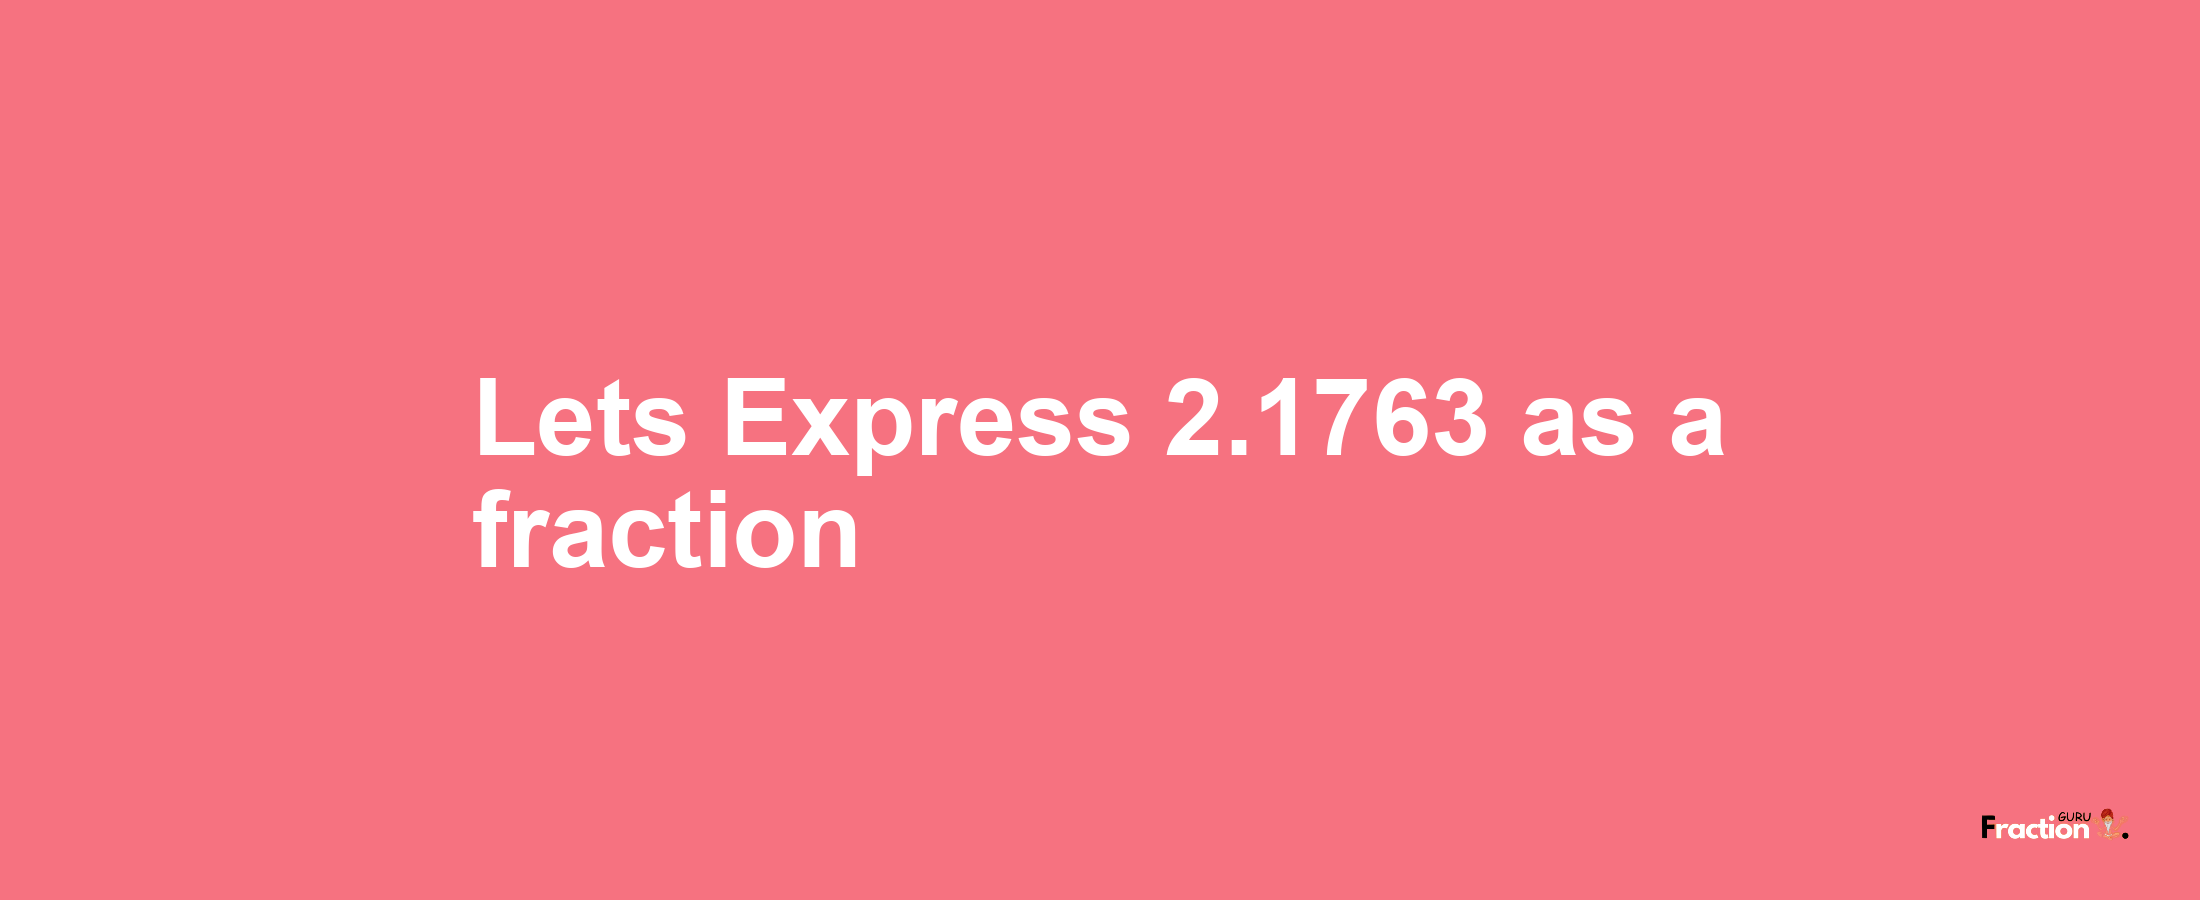 Lets Express 2.1763 as afraction